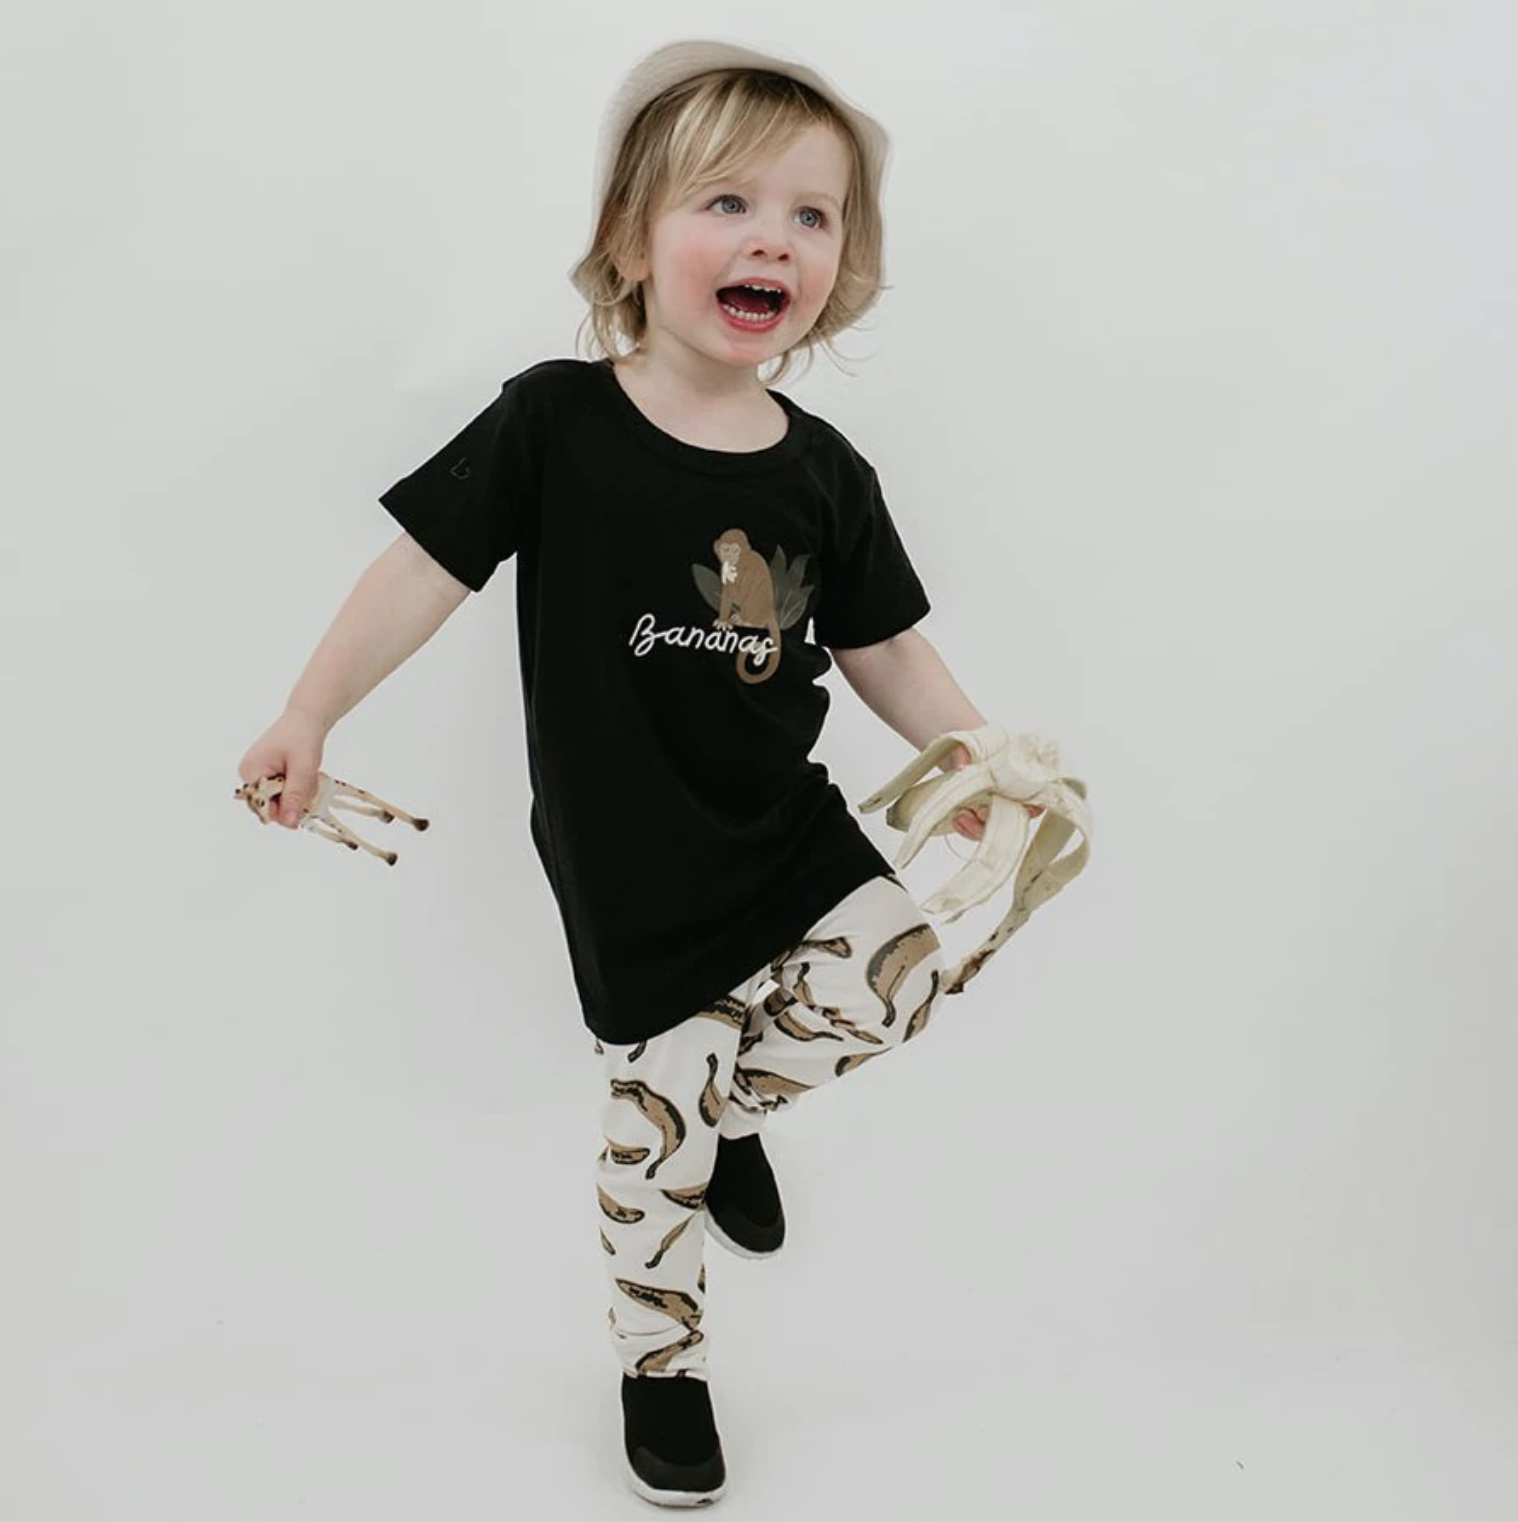 A kid wearing the banana leggings with a monkey shirt while holding a giraffe toy and a banana